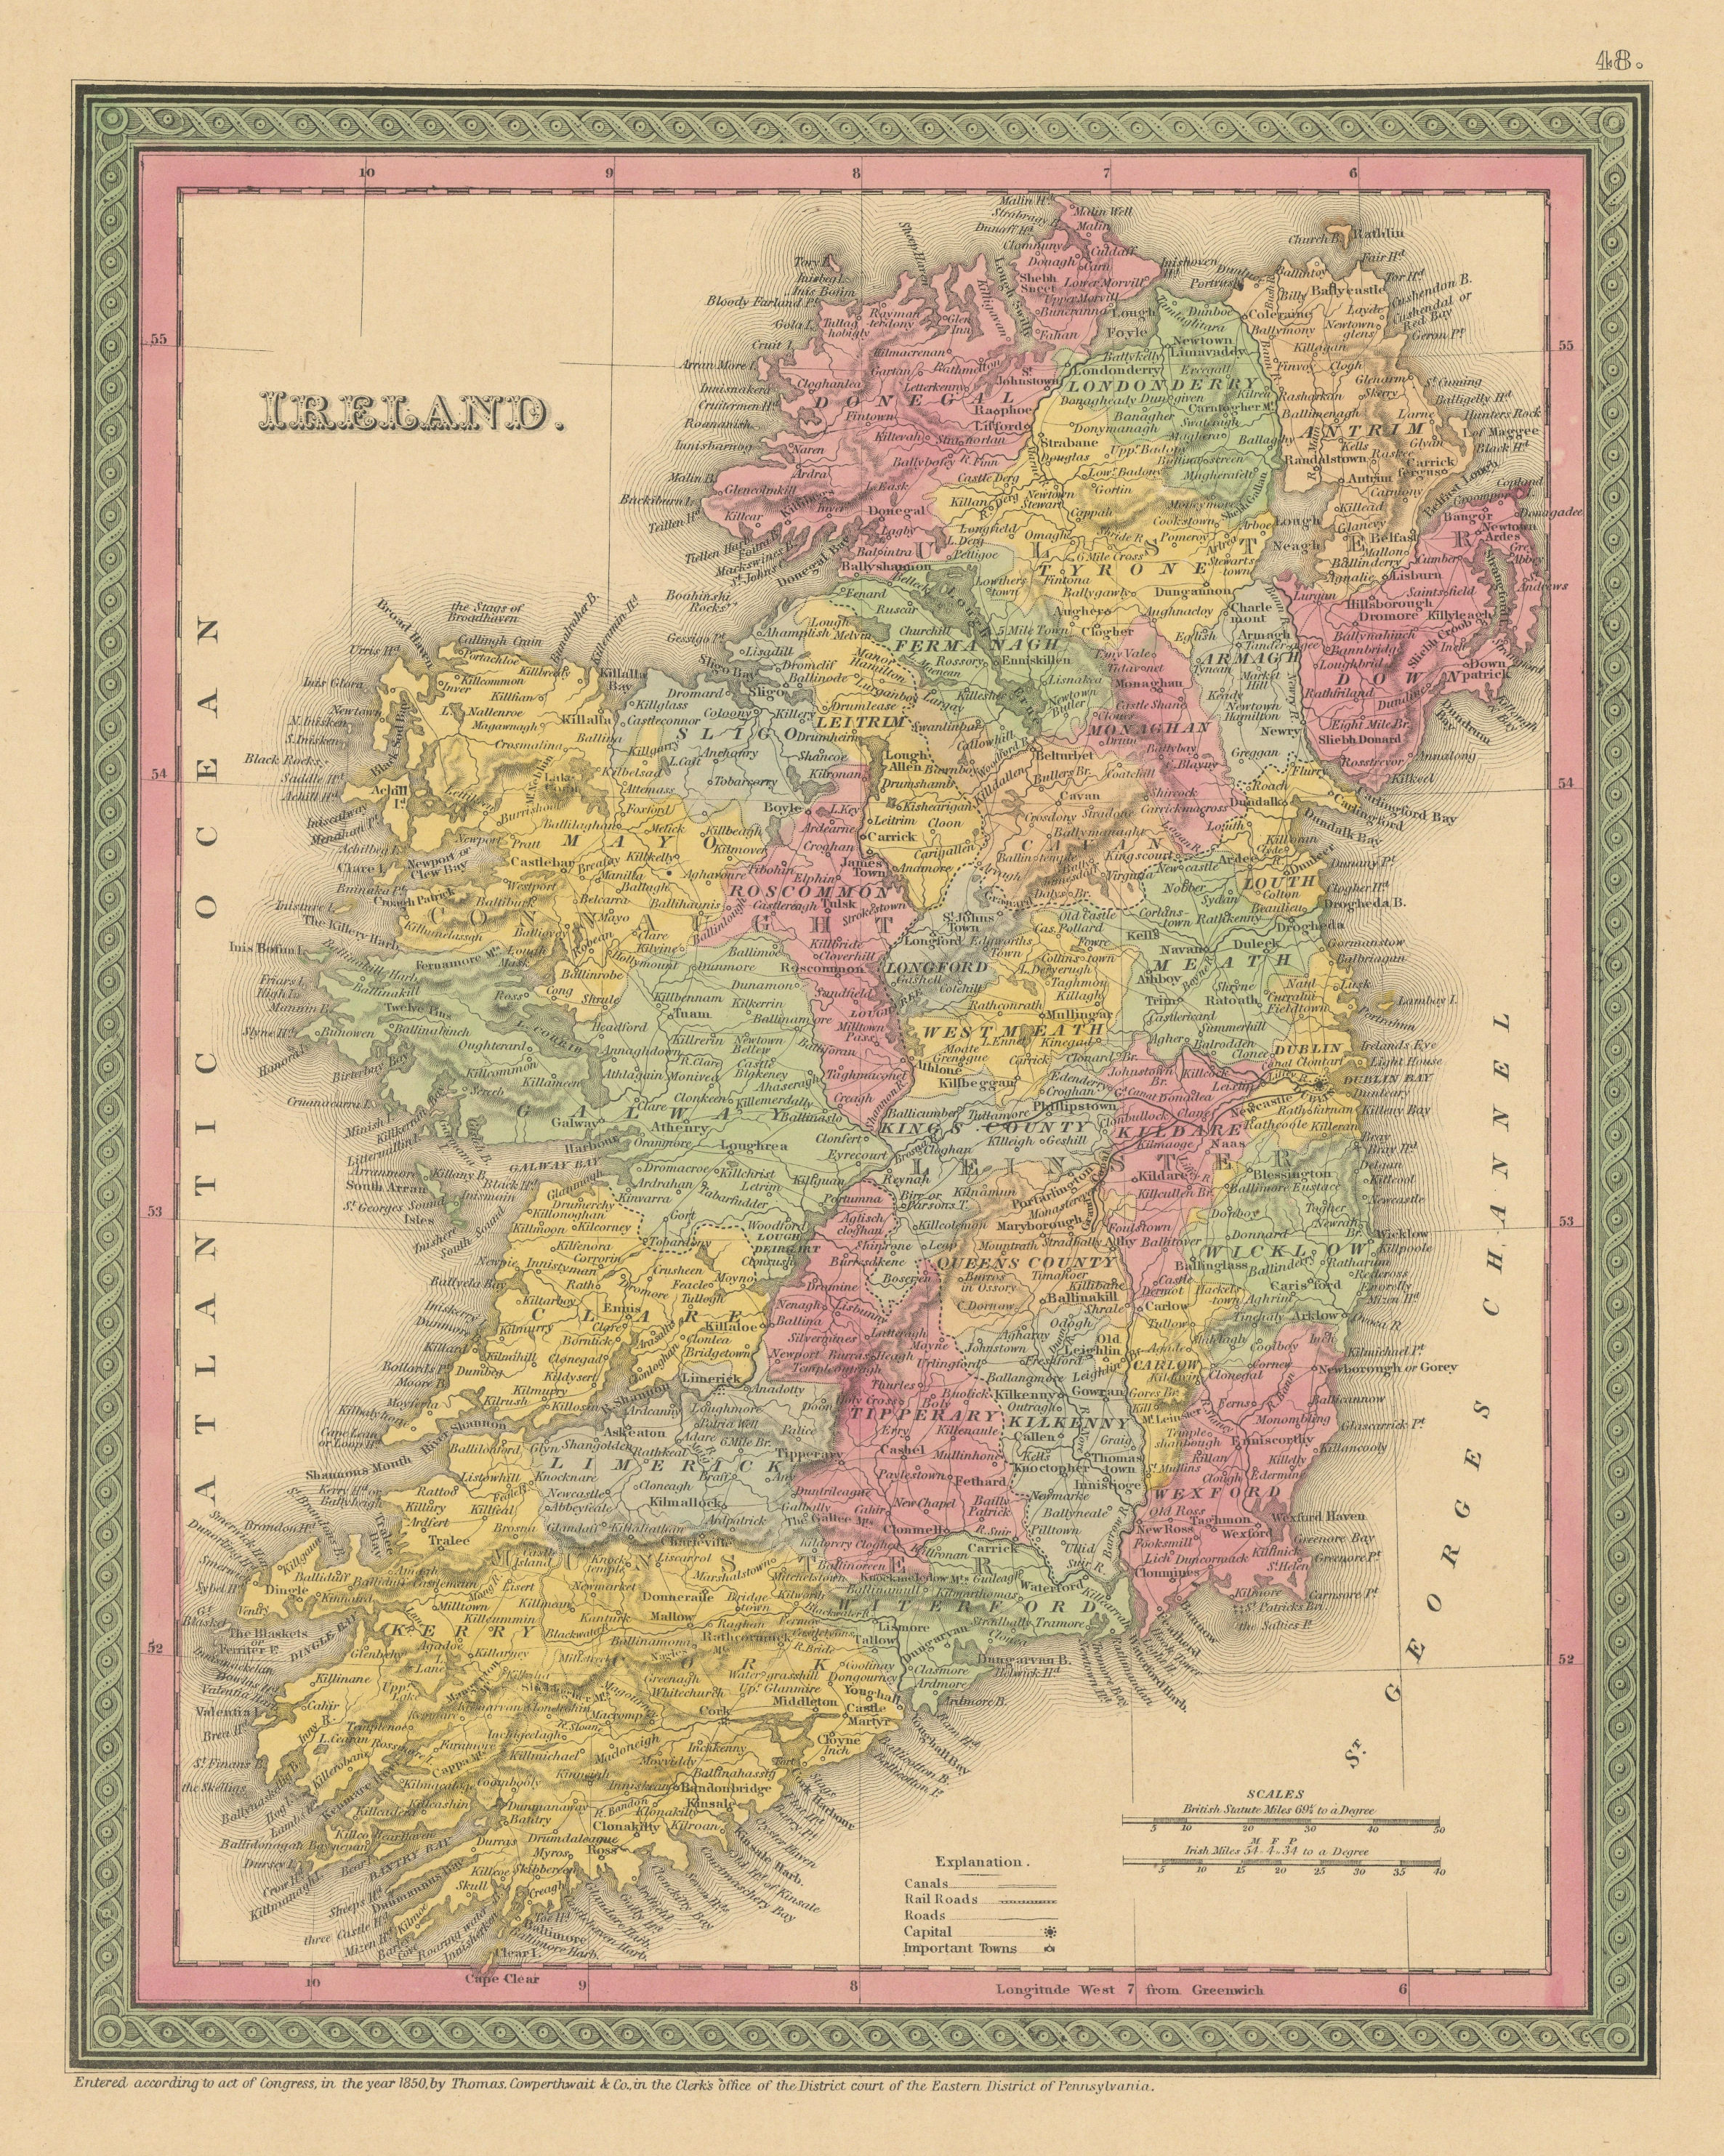 Associate Product Ireland. Counties & canals. THOMAS, COWPERTHWAIT 1852 old antique map chart